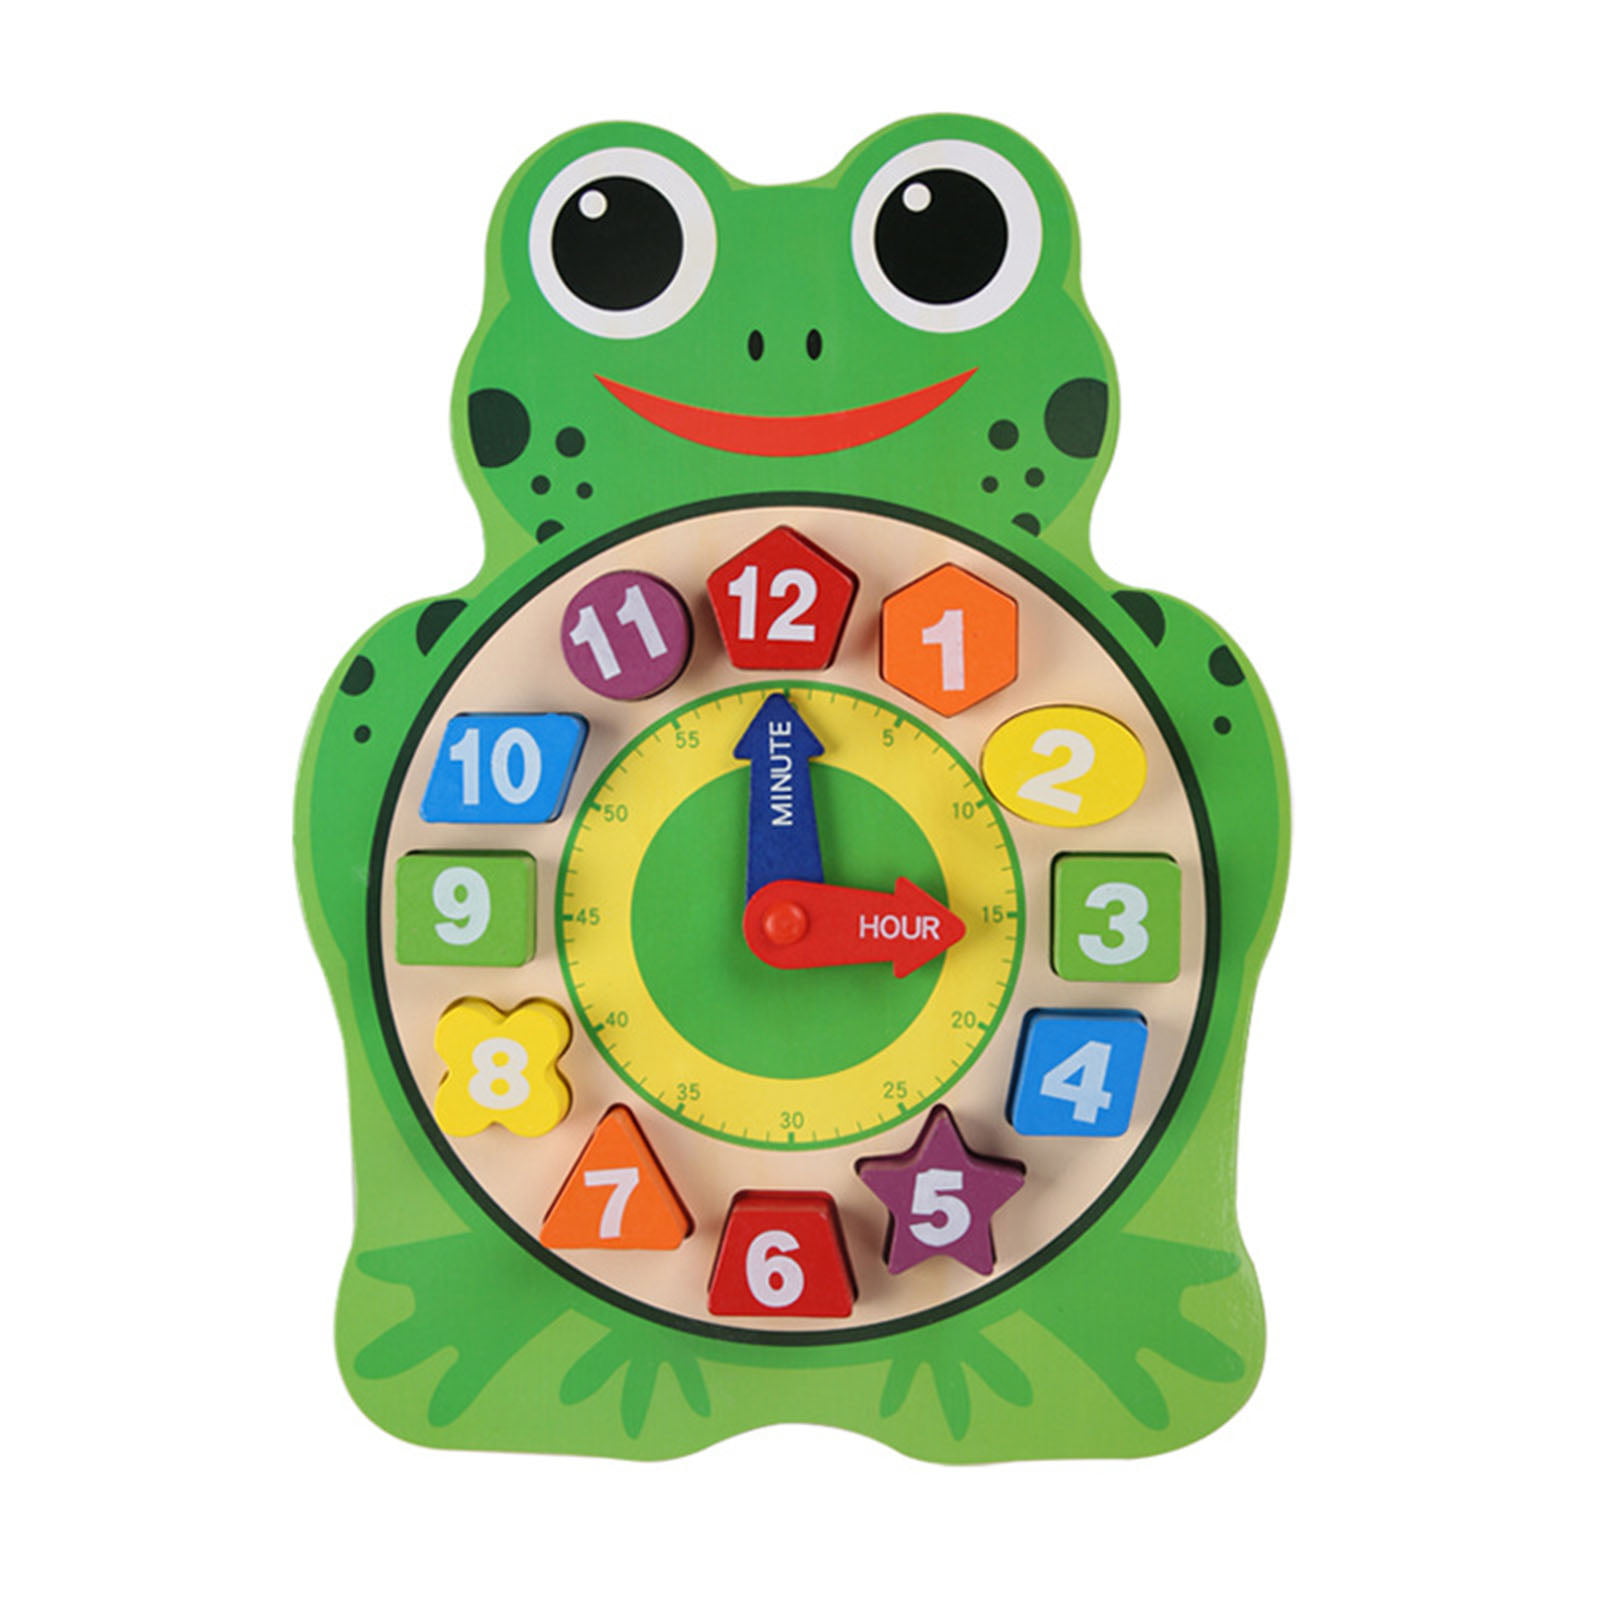 Animal Puzzle Clock Wooden Big Cartoon Owl Wooden Block Toy Educational Clock Toy Frog Clock Animal Durable for Girls Gifts Kids Boys Children Home 